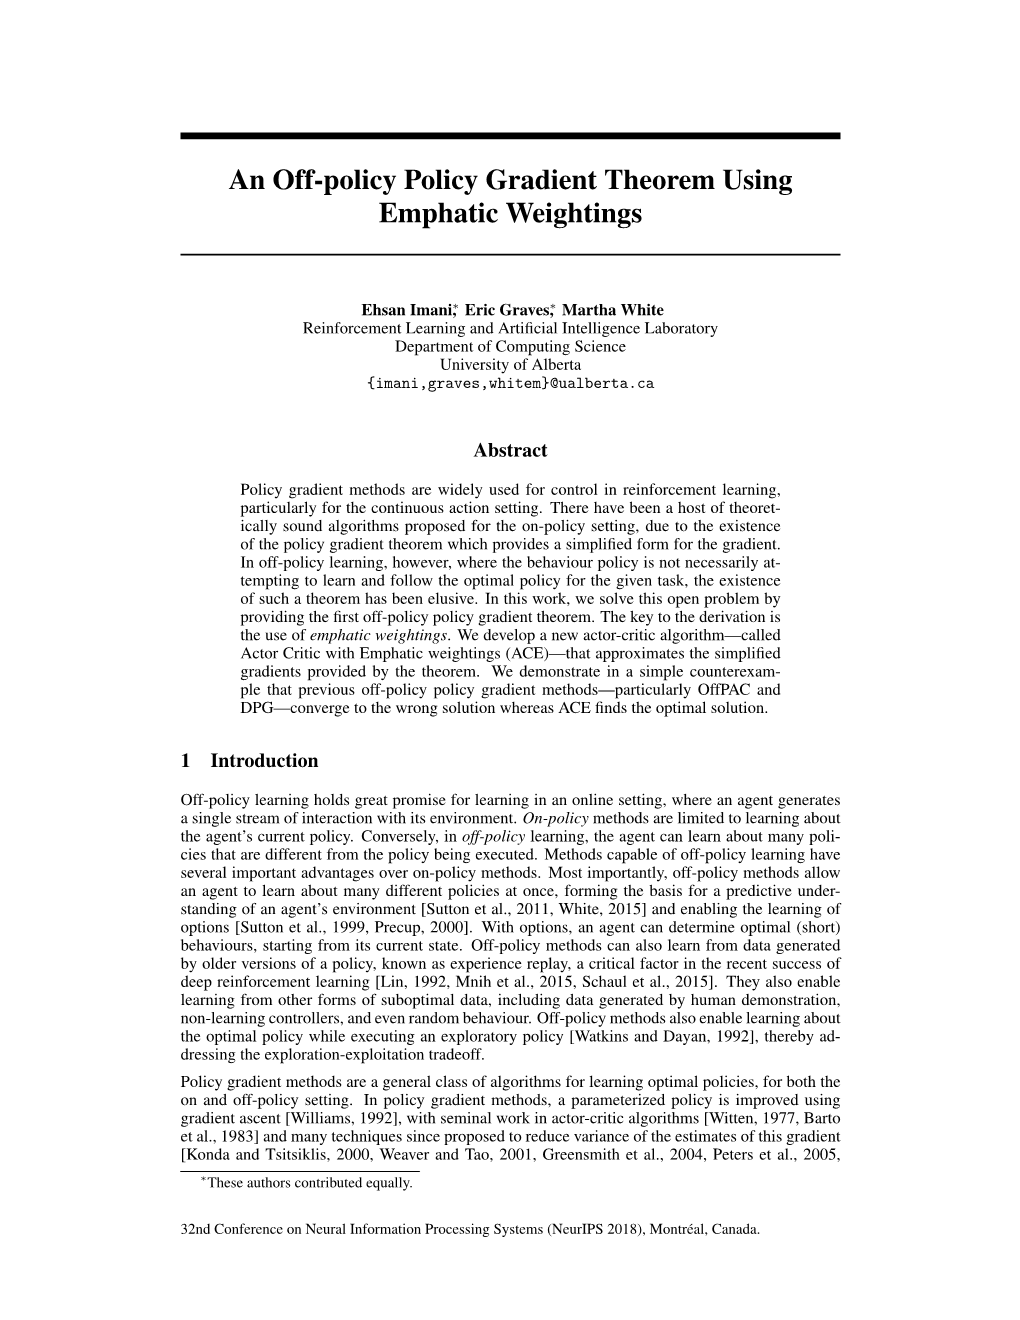 An Off-Policy Policy Gradient Theorem Using Emphatic Weightings